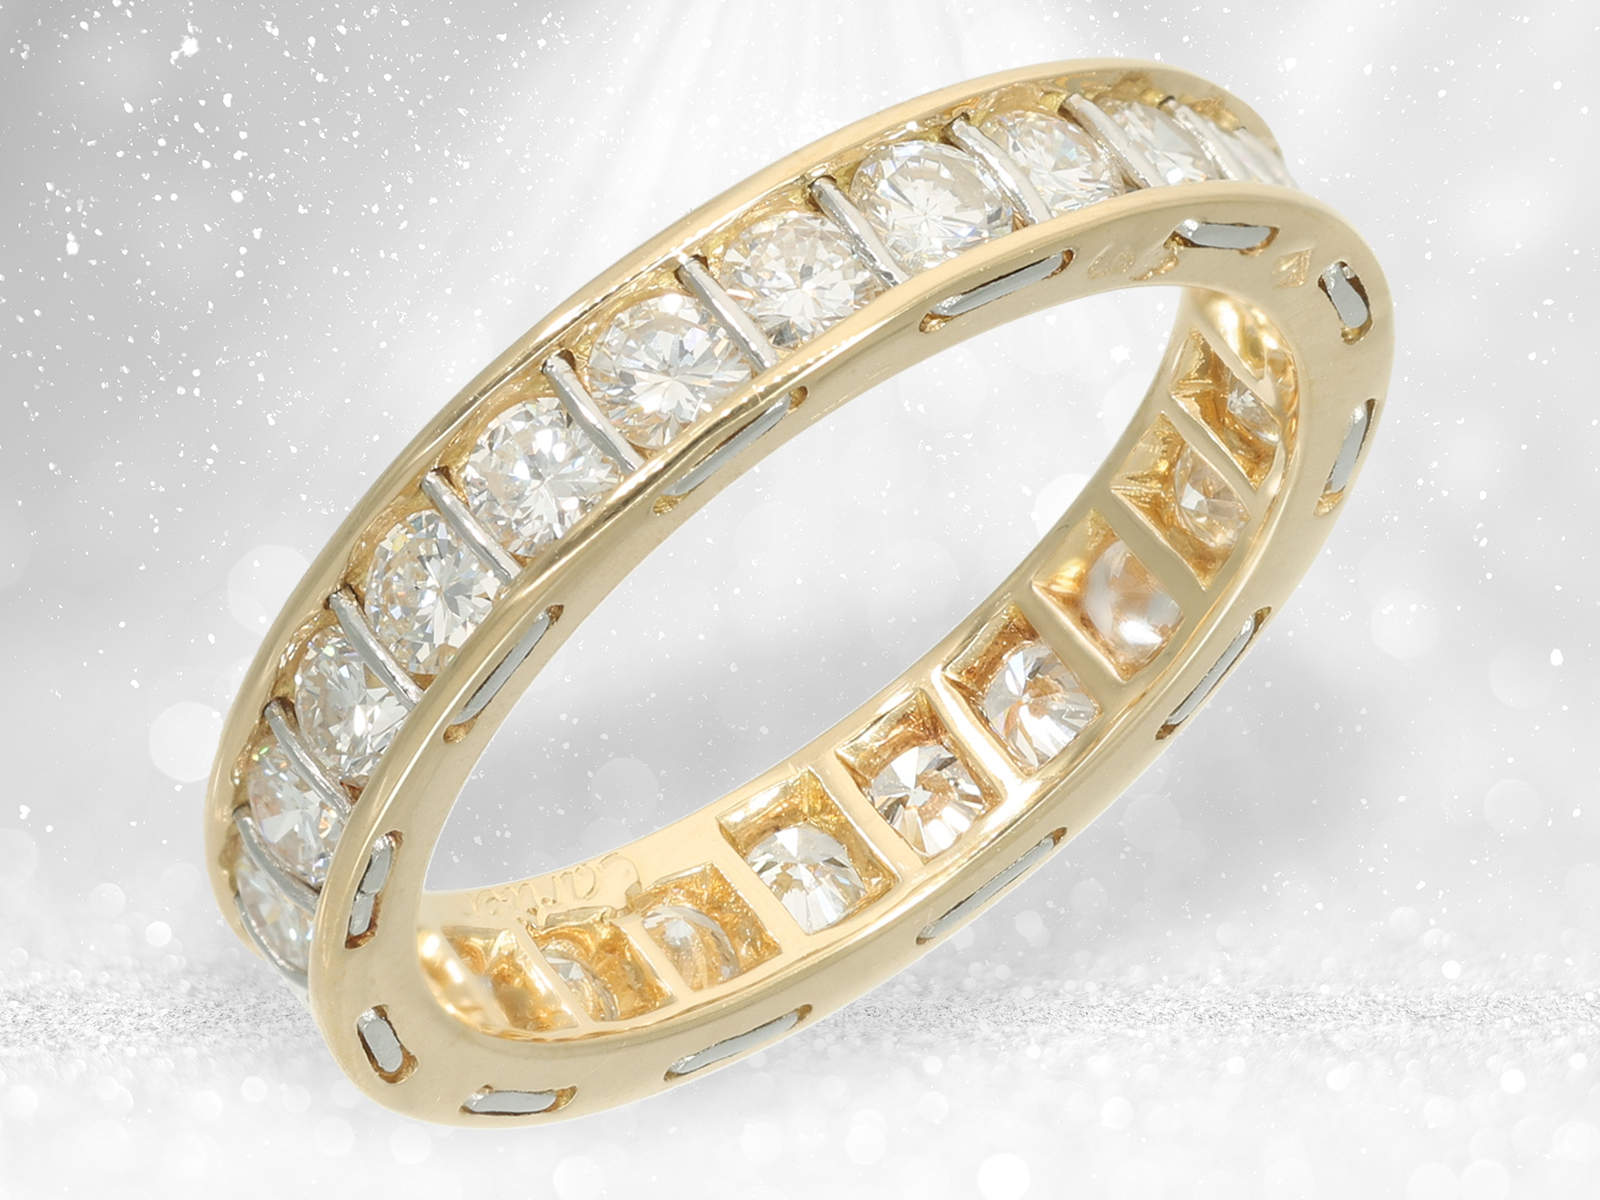 Luxurious vintage memory ring by Cartier, finest brilliant-cut diamonds of approx. 1.92ct, with box - Image 3 of 6